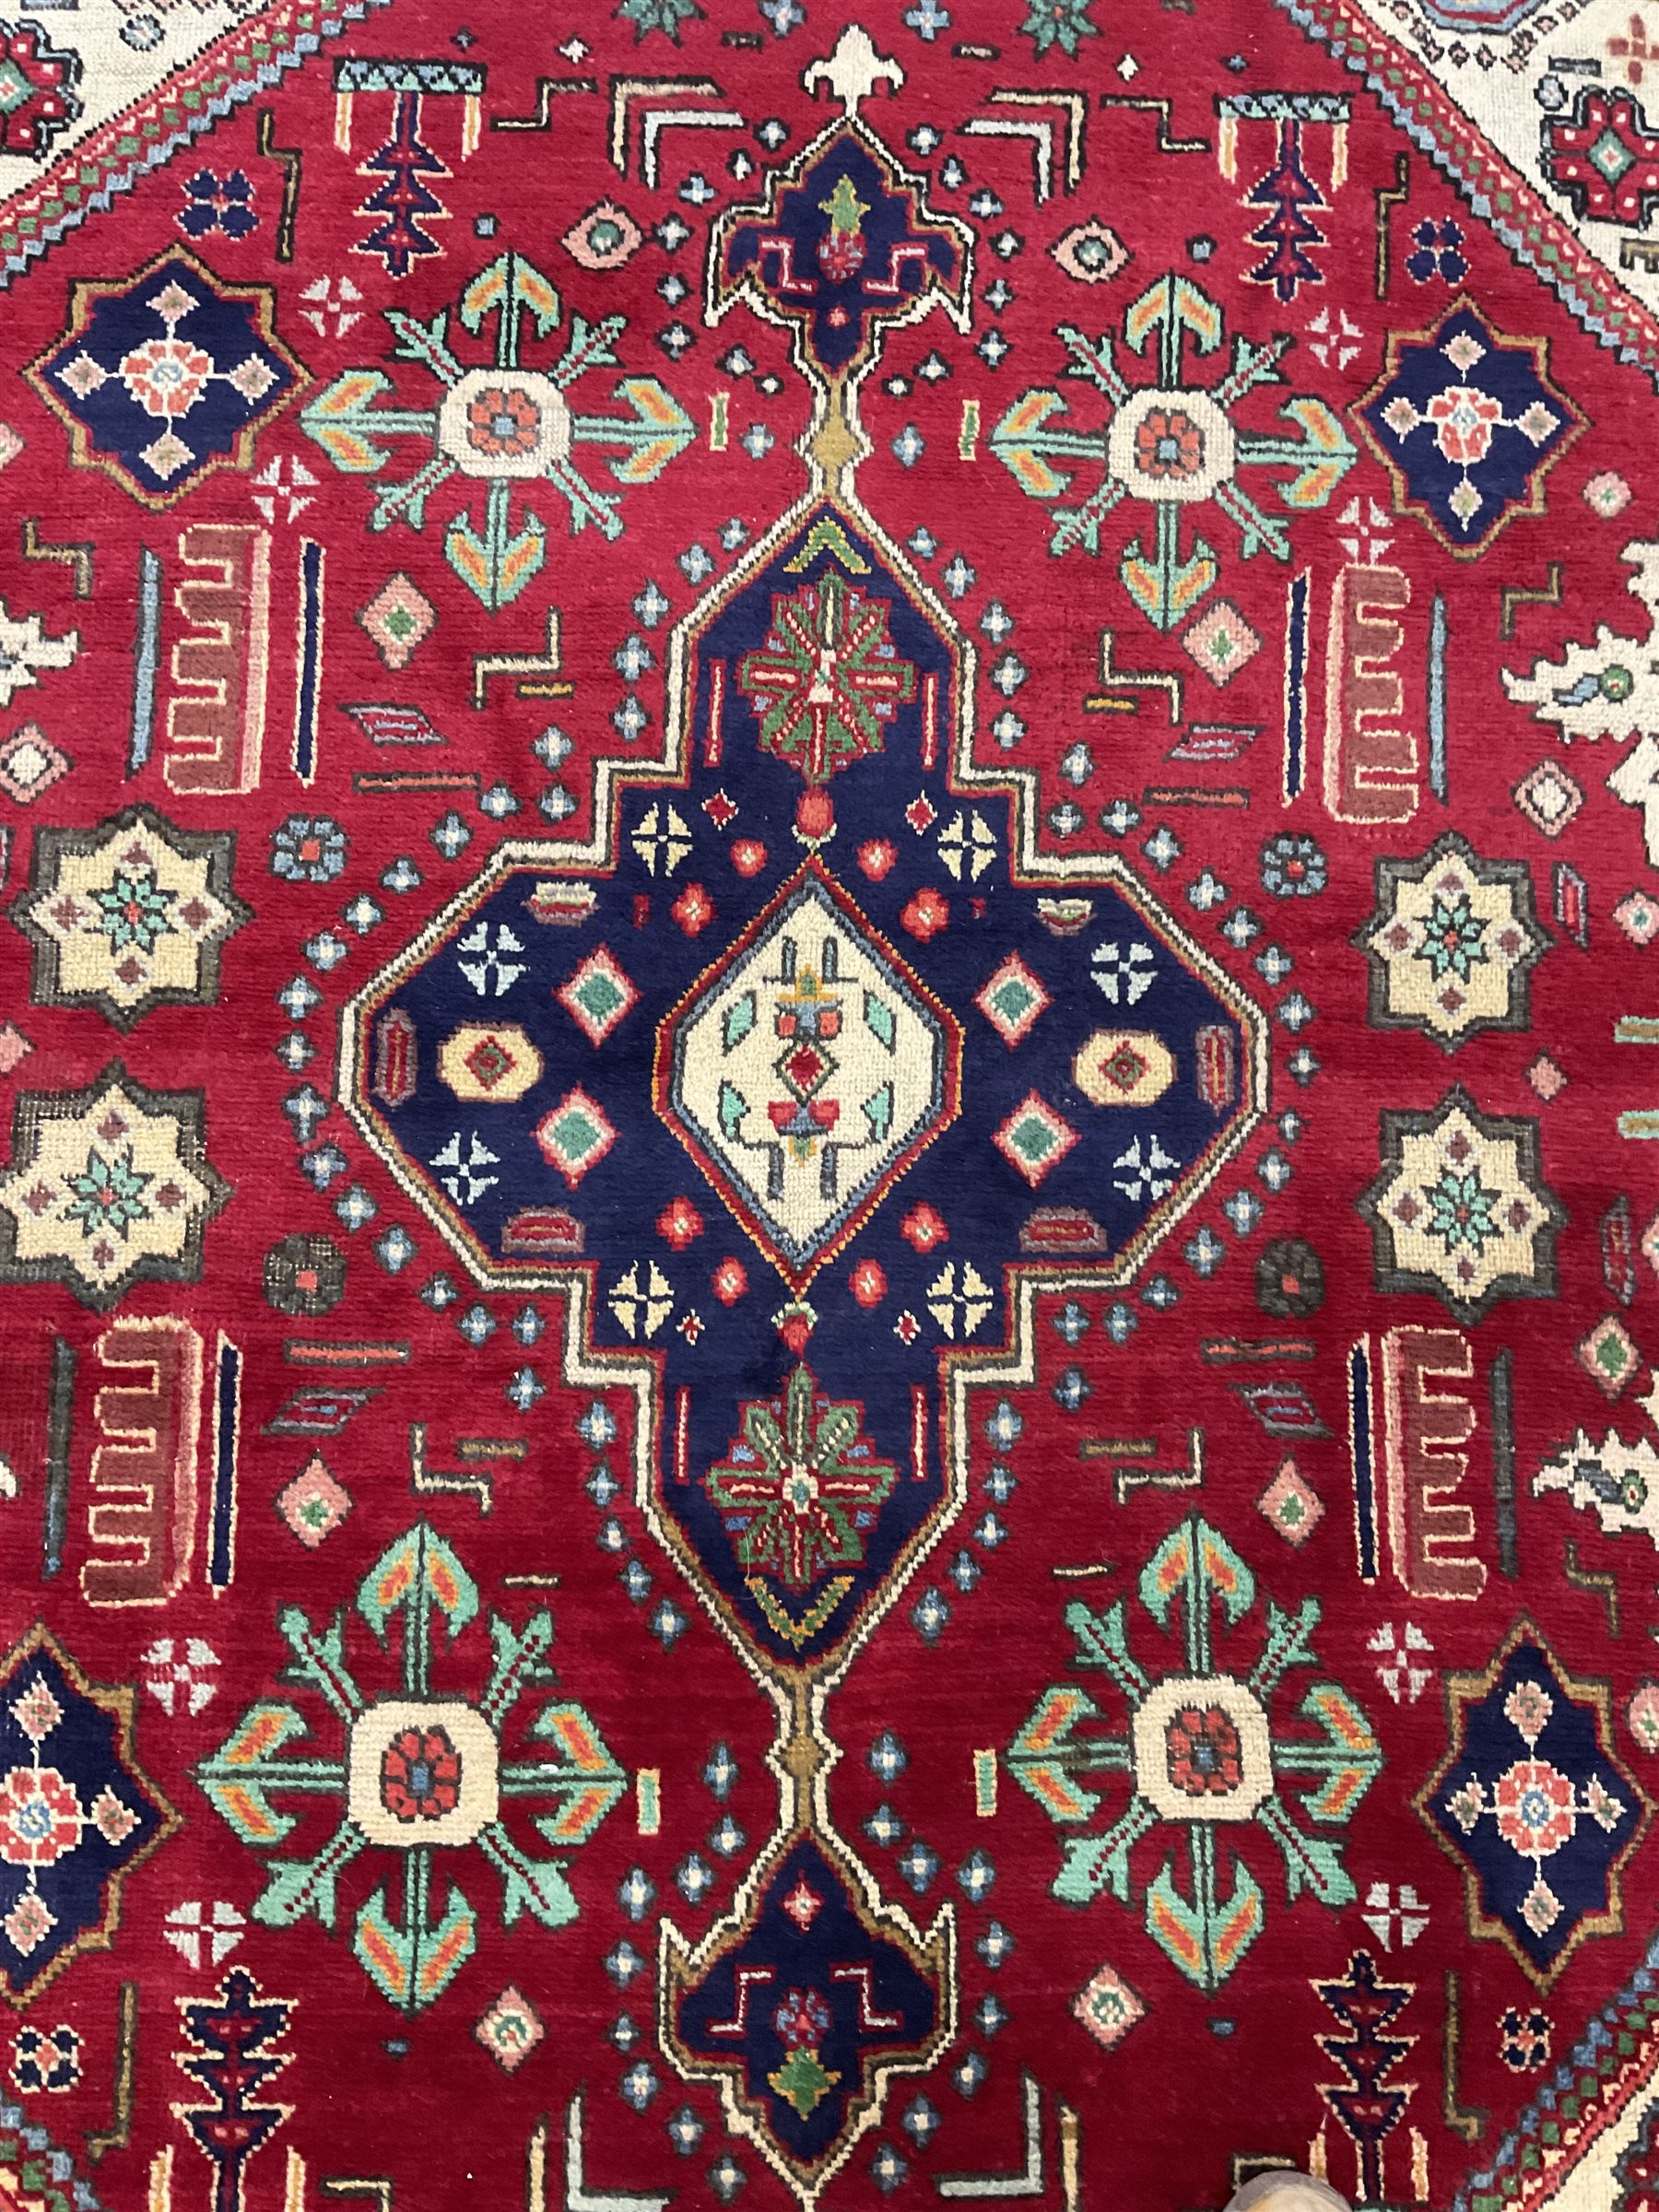 Qashqai red and blue ground rug - Image 2 of 4